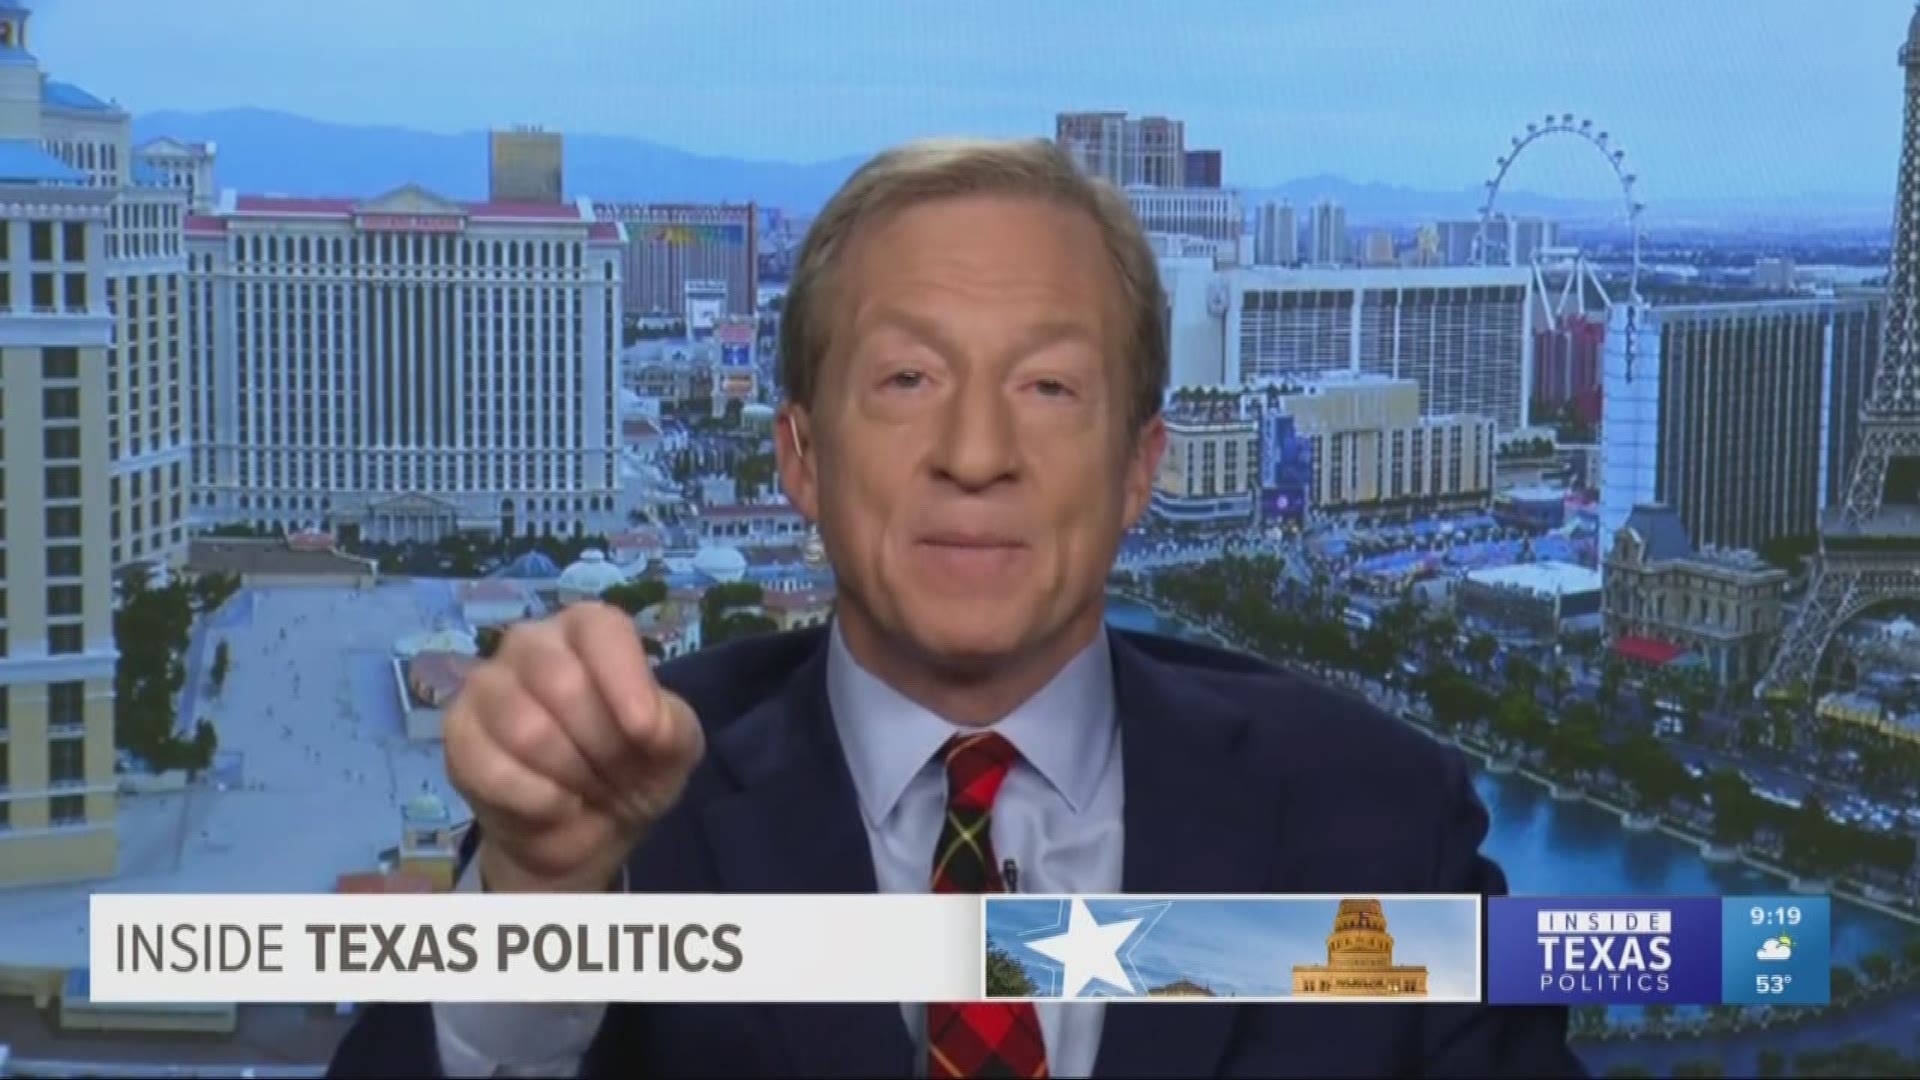 Democratic presidential candidate Tom Steyer told Inside Texas Politics he has momentum heading into Super Tuesday & that his outside experience is needed in D.C.